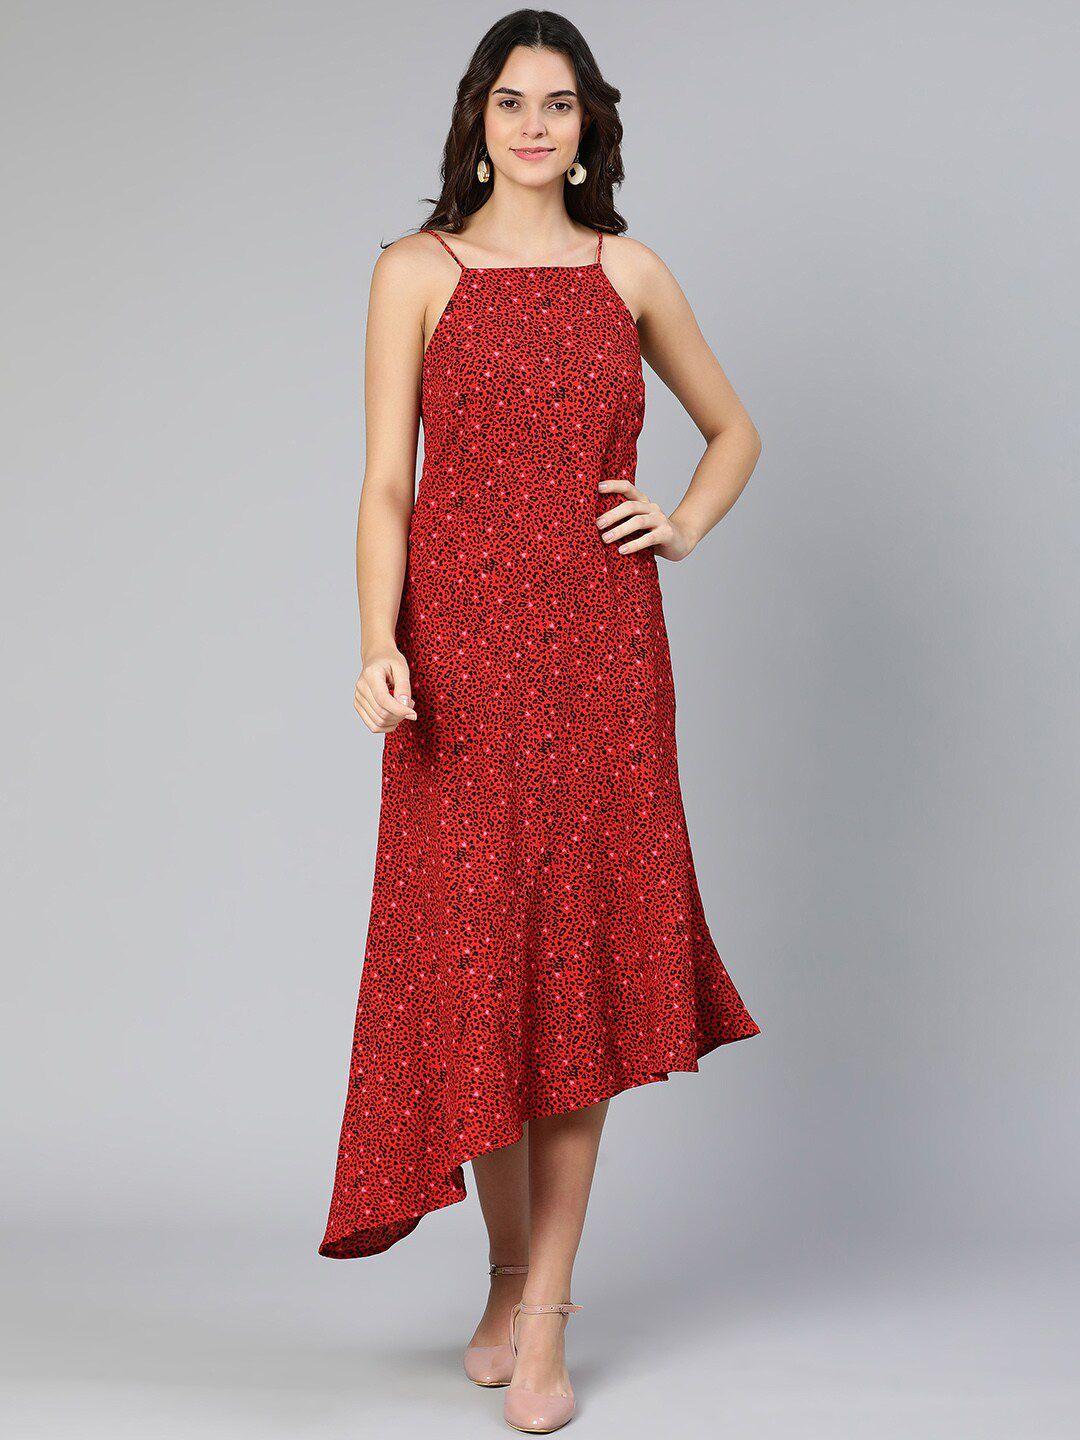 oxolloxo-red-floral-satin-a-line-midi-dress